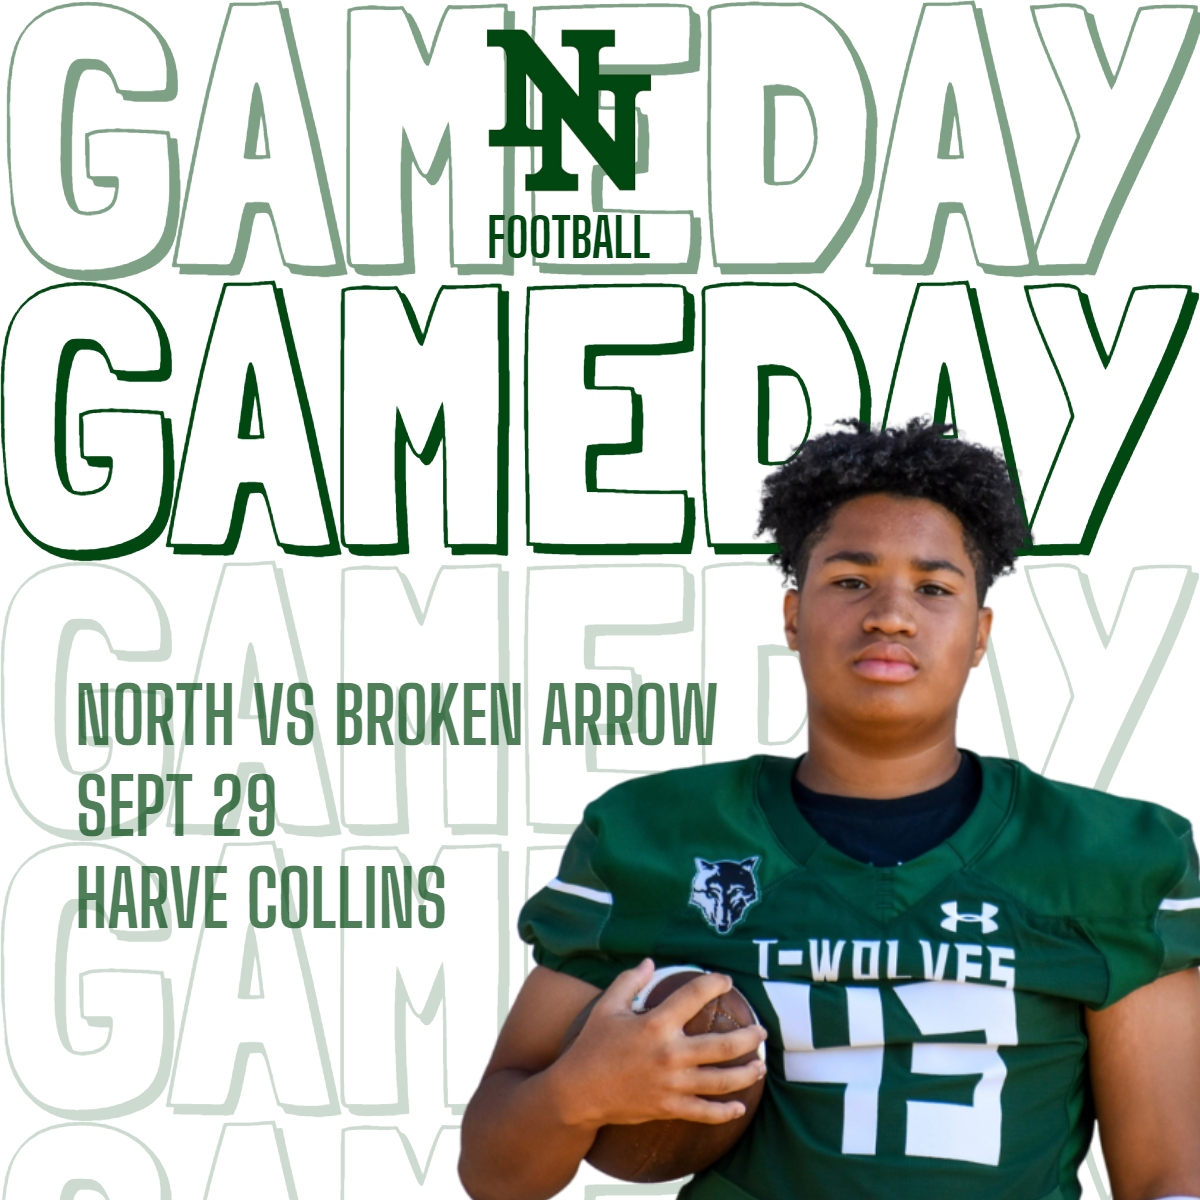 Game Day!! 🐺 🏈 It's the T-Wolves and Tigers as Broken Arrow comes to Norman. 

#AmatVictoriaCuram | #GoNorth 

📅 Thurs, Sept 29
🕖 7:00 p.m. 
📍 Harve Collins 
📺 KREFSports.tv
💗 Theme: Pink Out